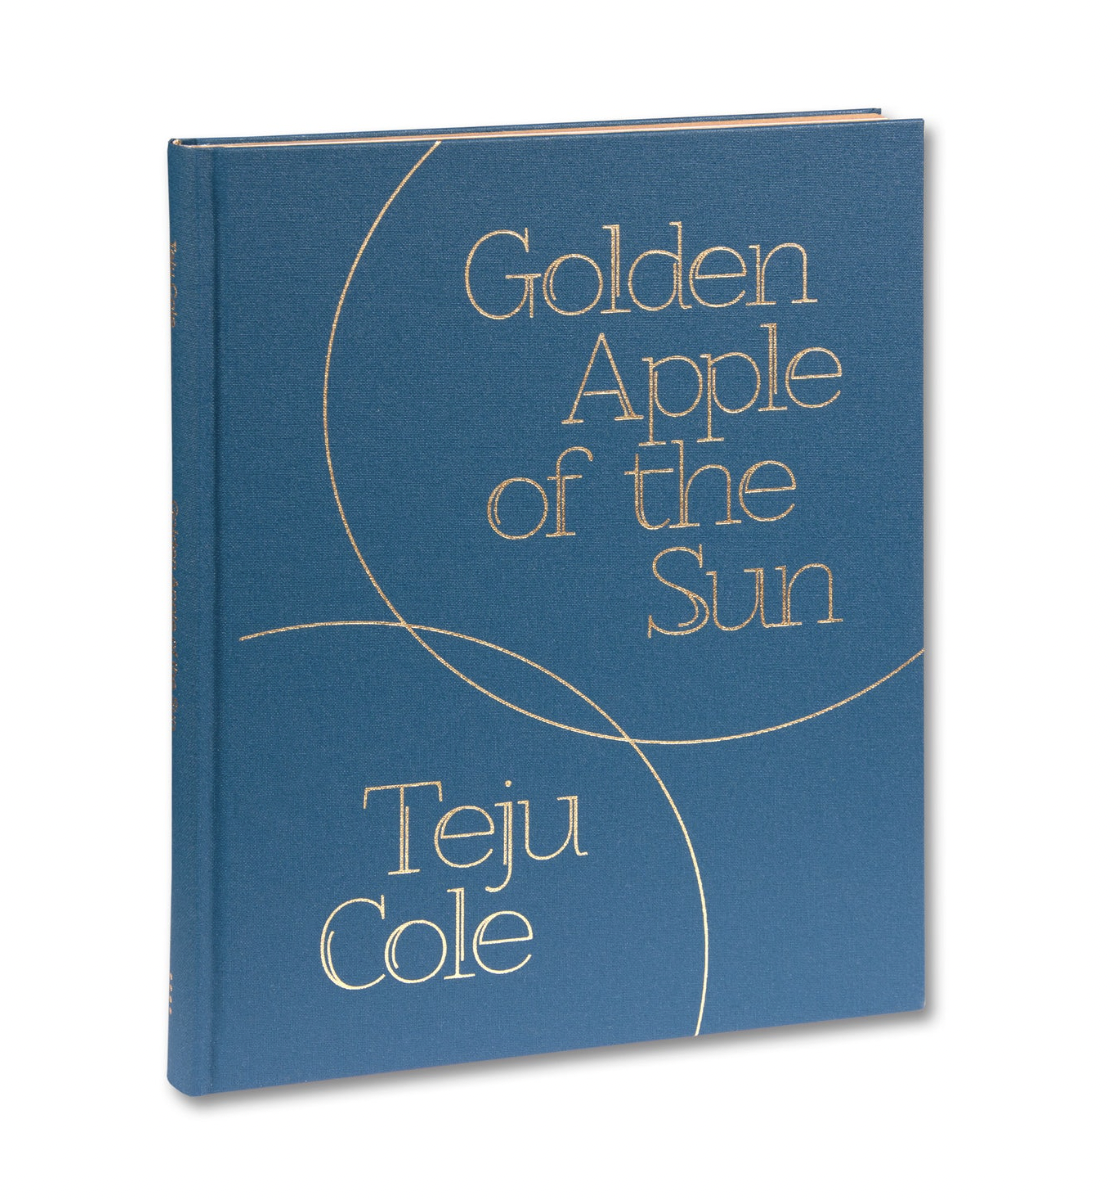 《Golden Apple of the Sun》by Teju Cole